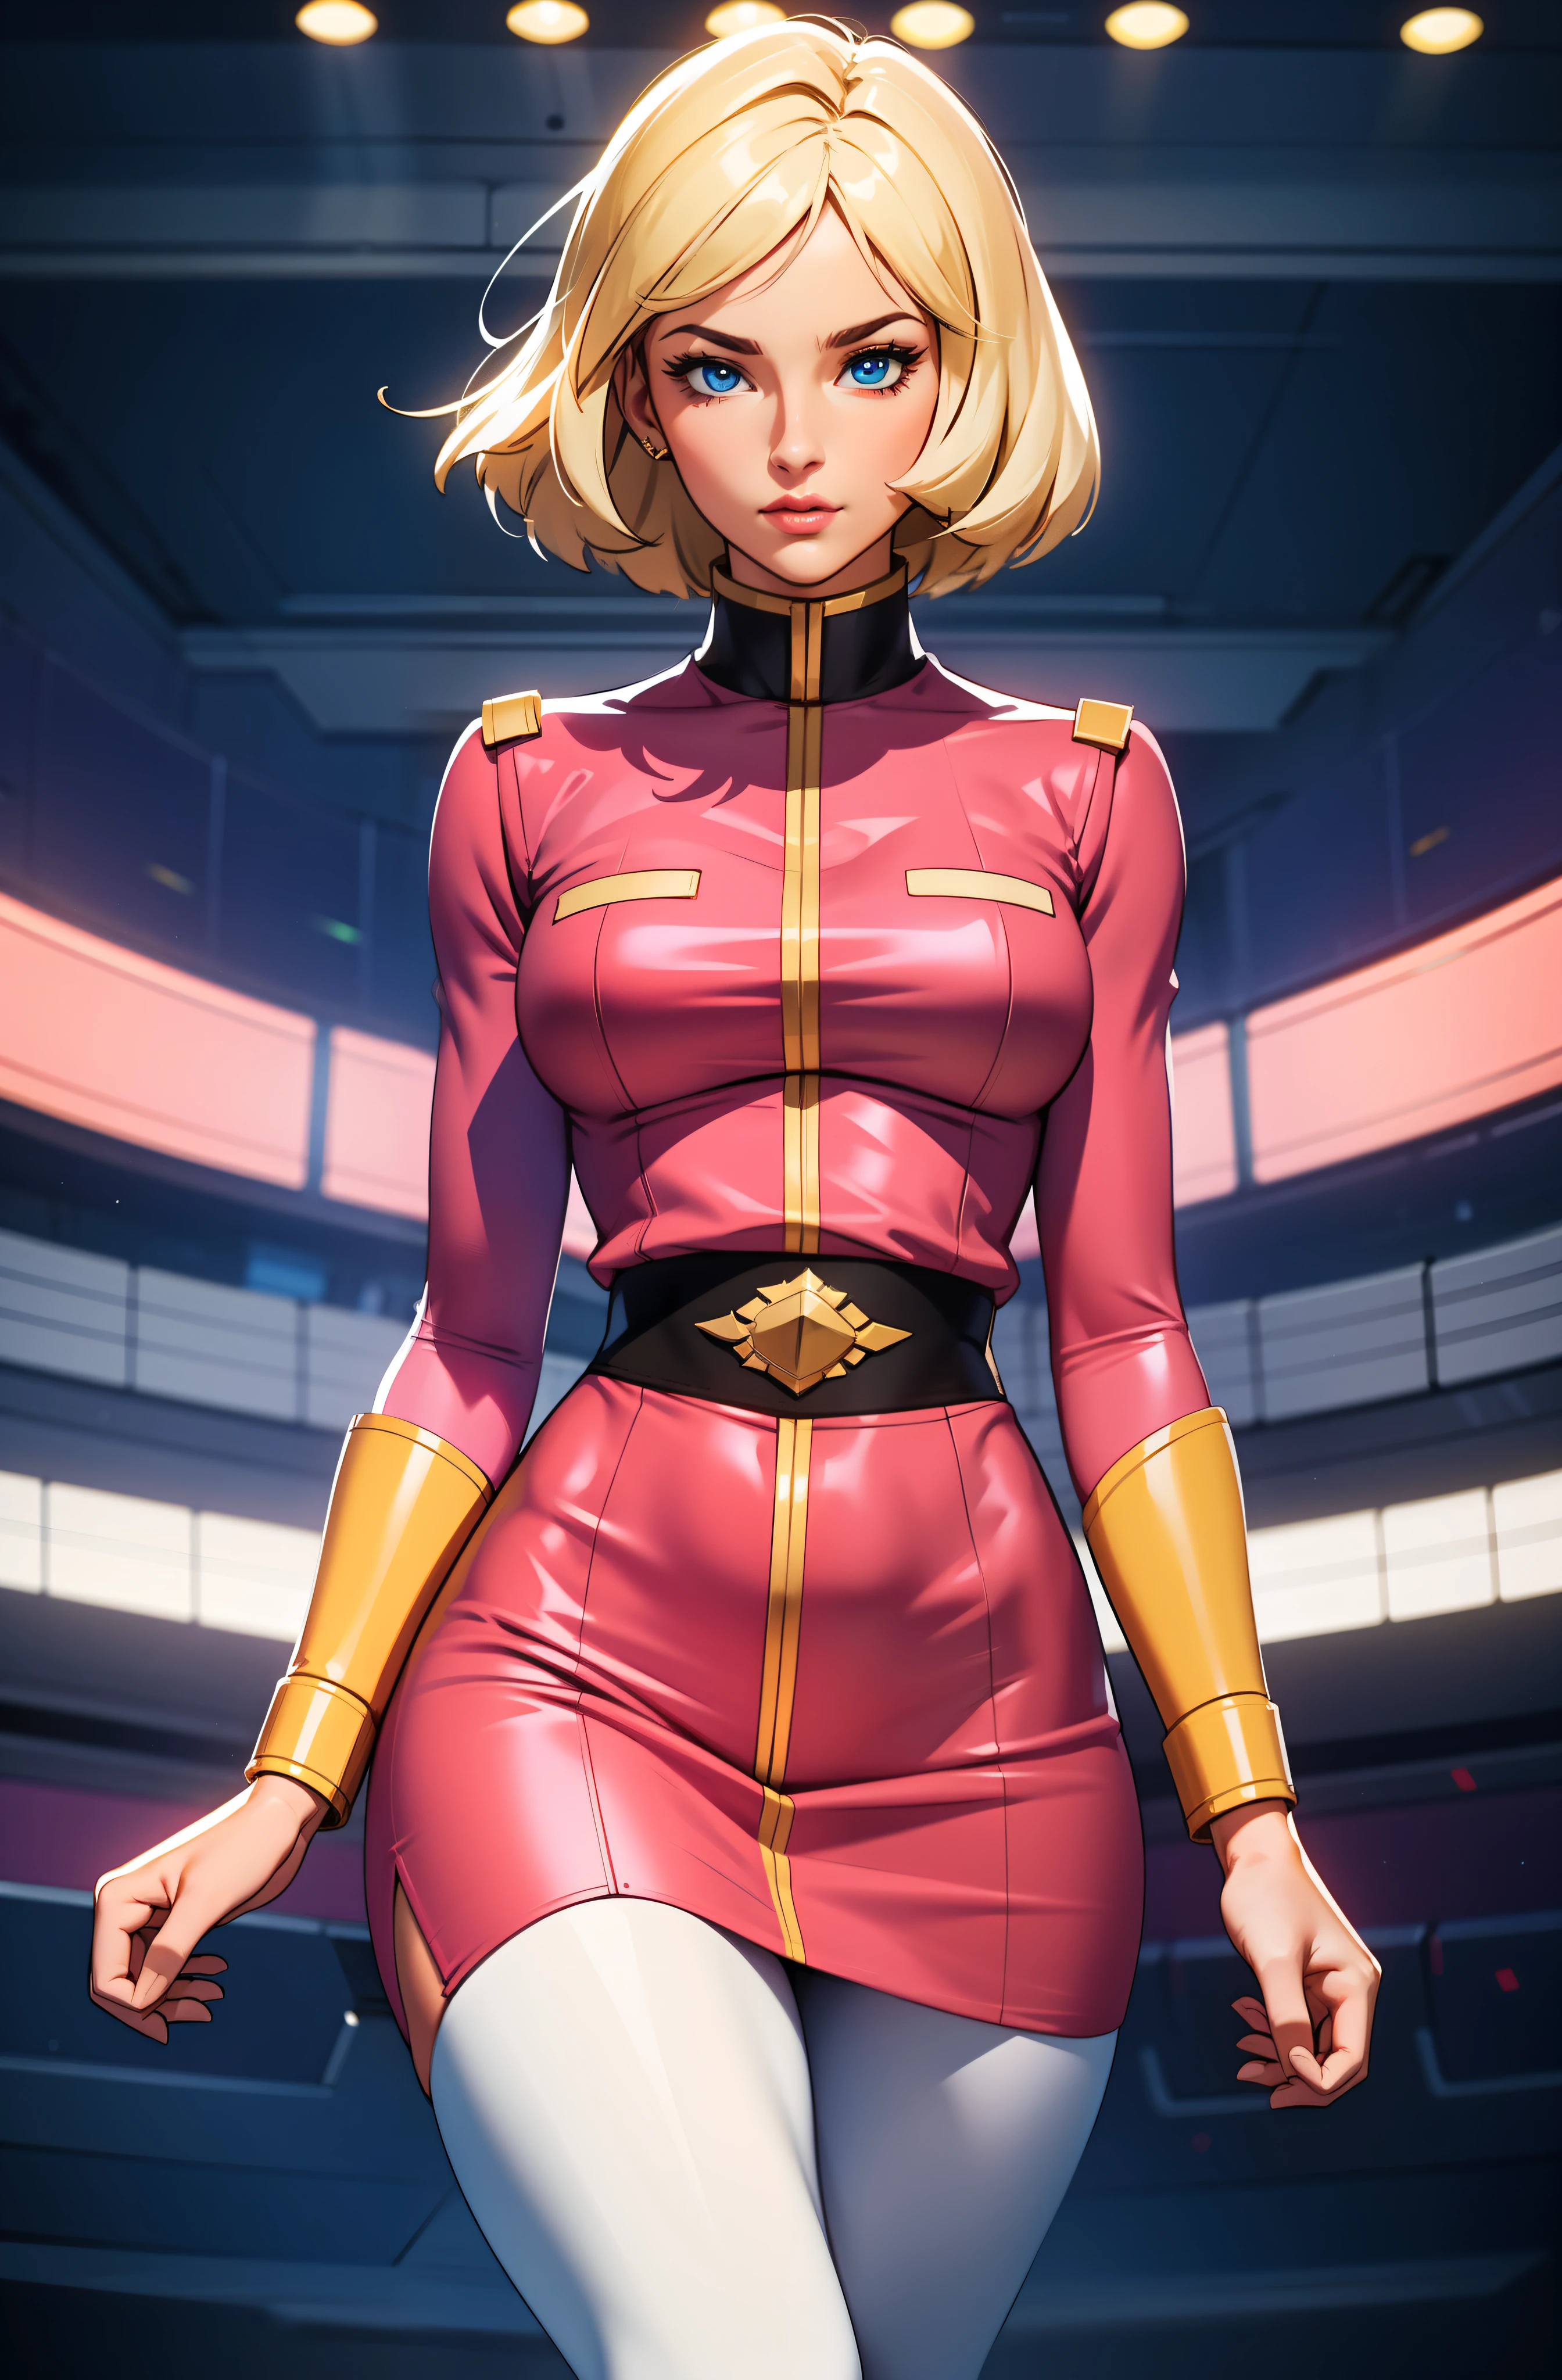 ((masterpiece)), ((cinematic lighting)), realistic photo、Real Images、Top image quality、1girl in, sayla mass, Elegant, masterpiece, Convoluted, slim arms, wide hips, thick thighs, thigh gaps, Best Quality, absurderes, high face detail, Perfect eyes, mature, Cowboy Shot, , Vibrant colors, soft pink uniform, soft pink Skirt, white tights